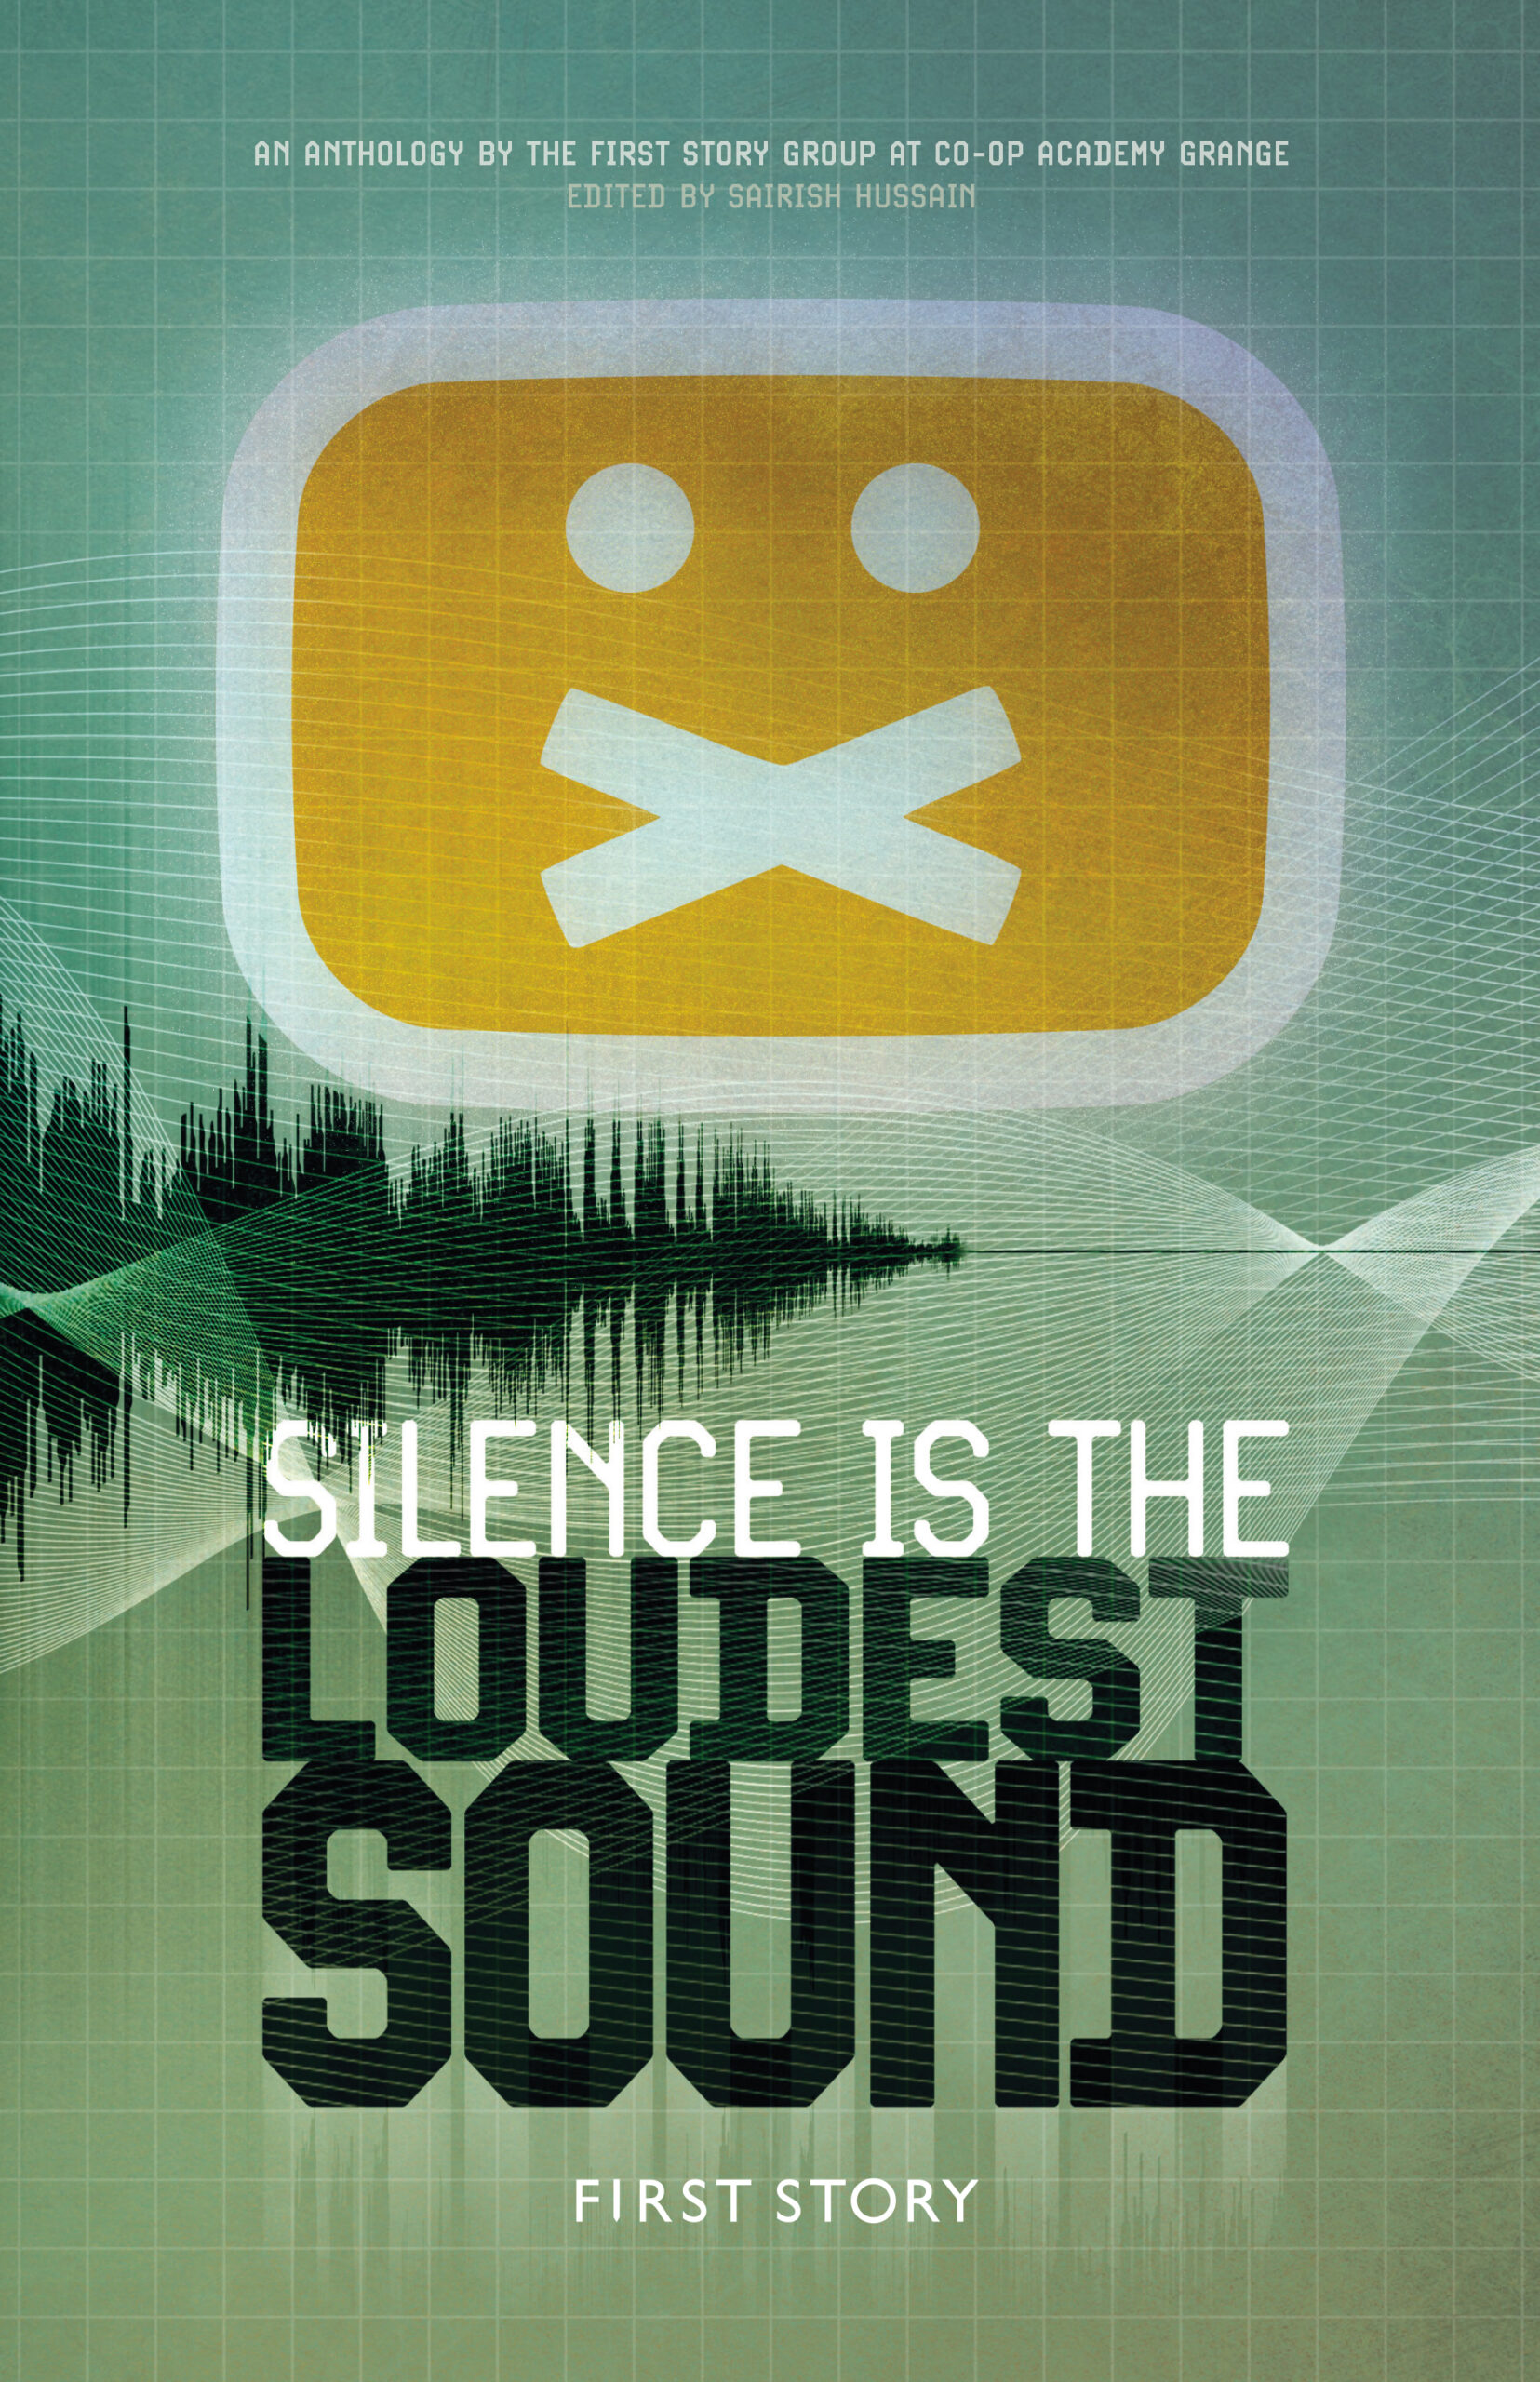 Cover of First Story Anthology for Co-op Academy Grange, titled Silence is the Loudest Sound